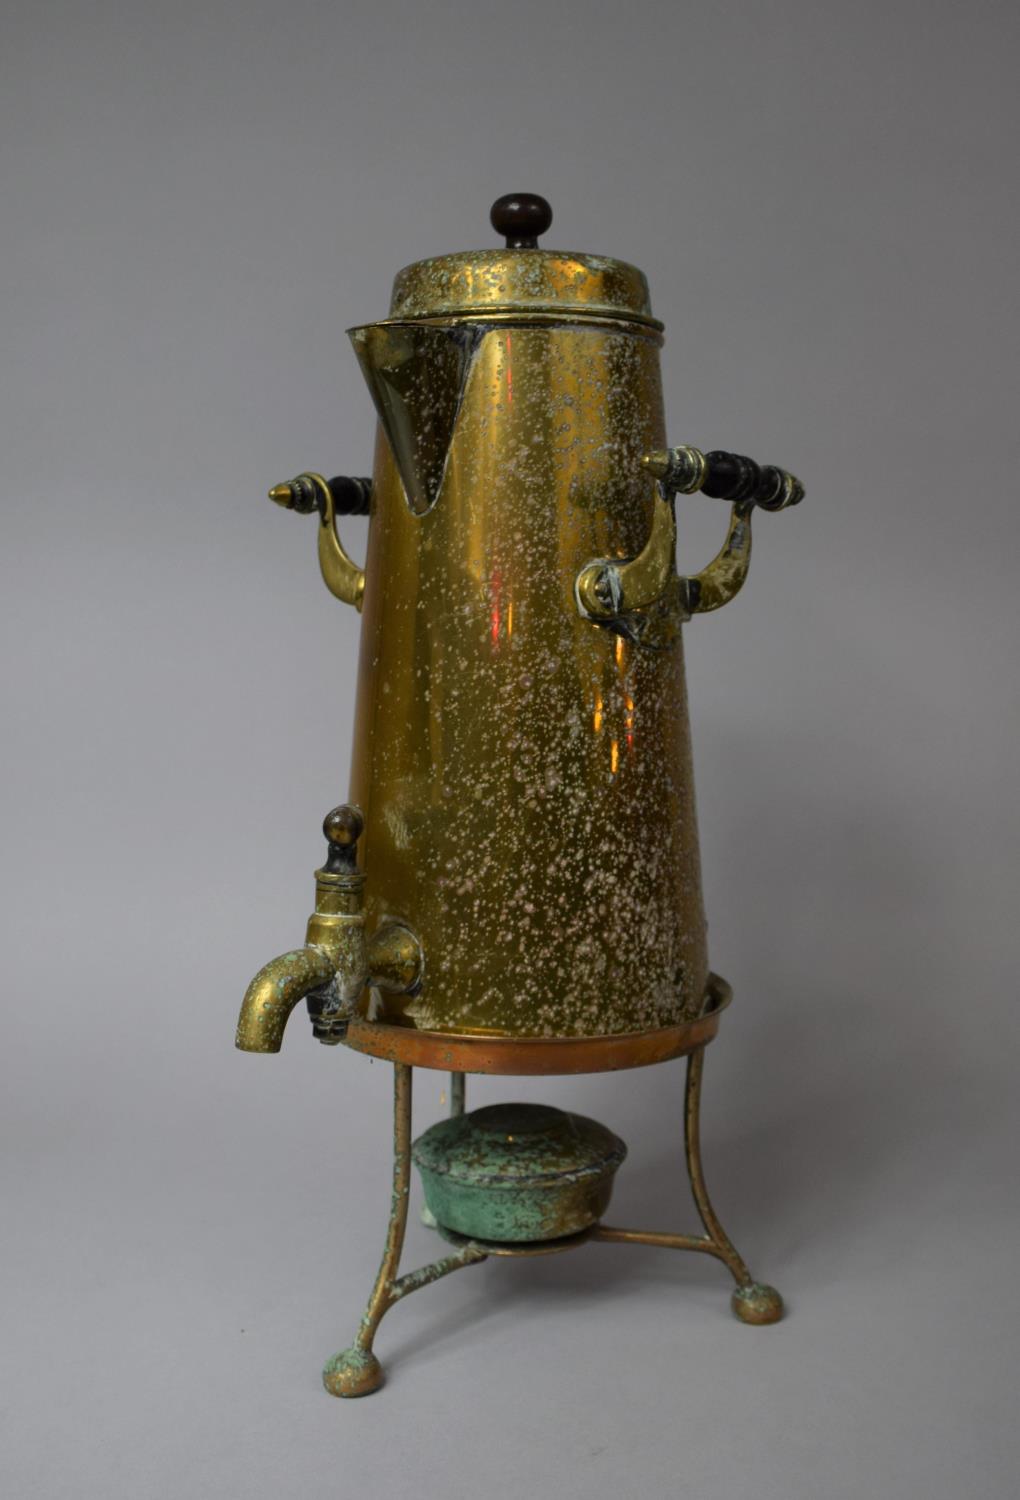 A Mid 20th Century Brass Coffee Samovar on Stand with Burner, 40cm high - Image 2 of 4